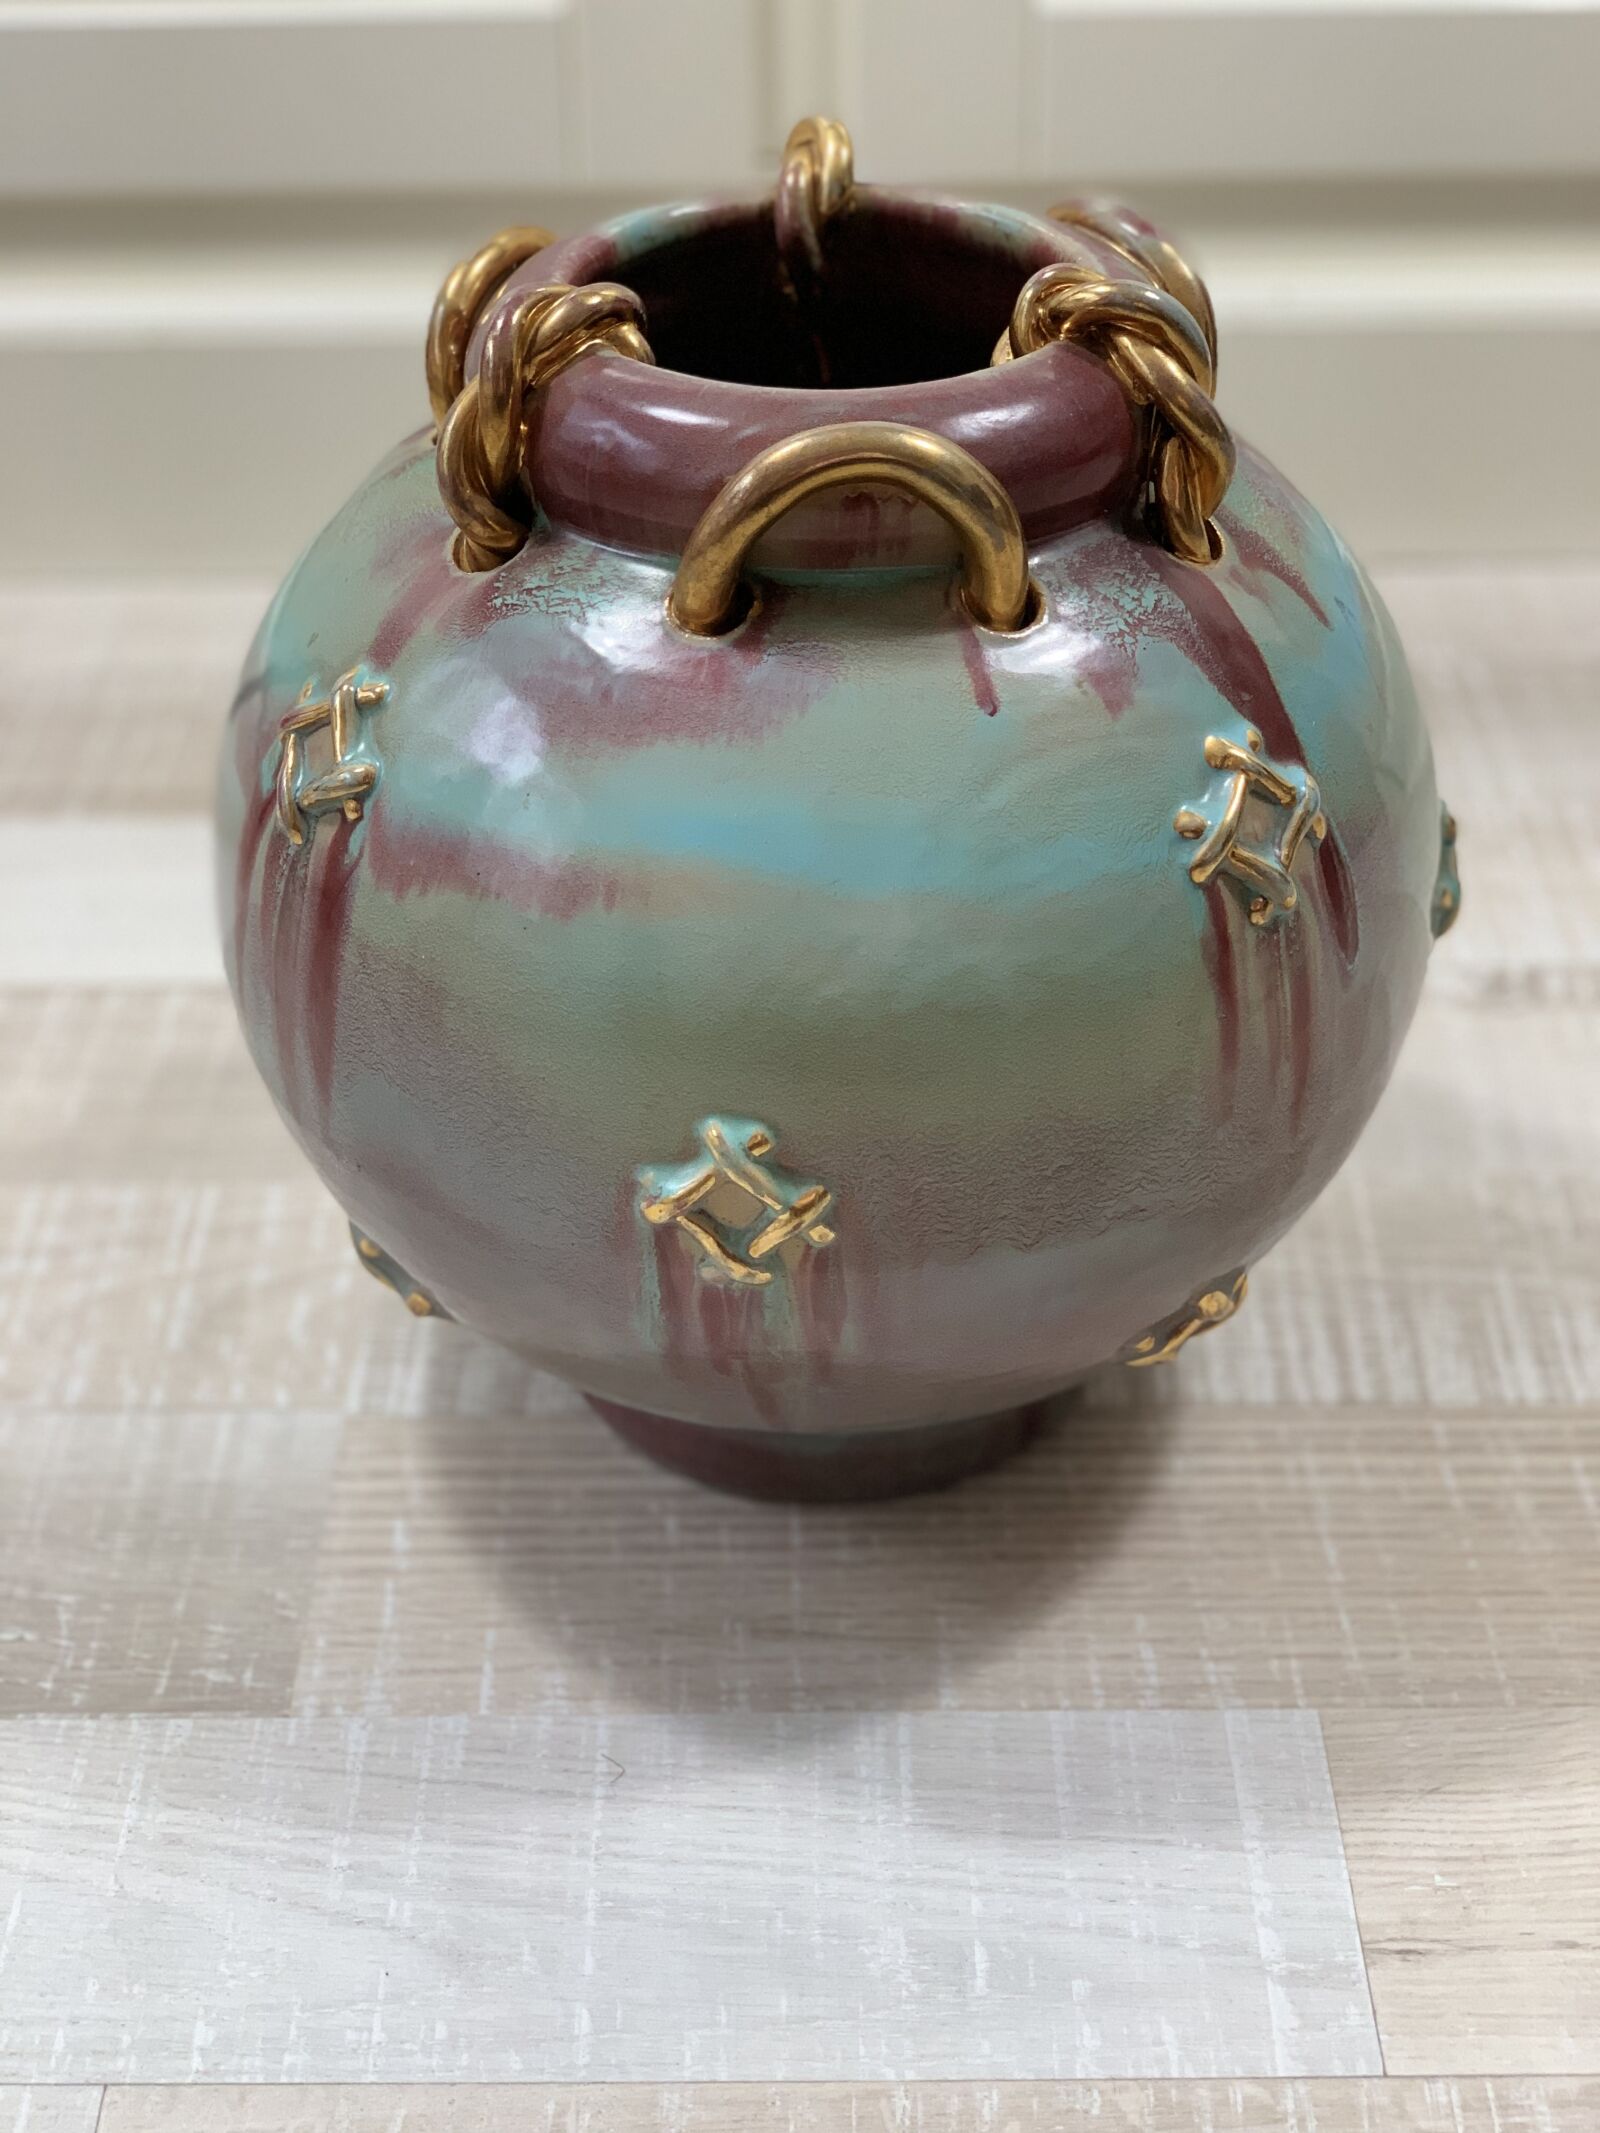 iPhone XS back dual camera 6mm f/2.4 sample photo. Jules guerin, vase, guerin photography